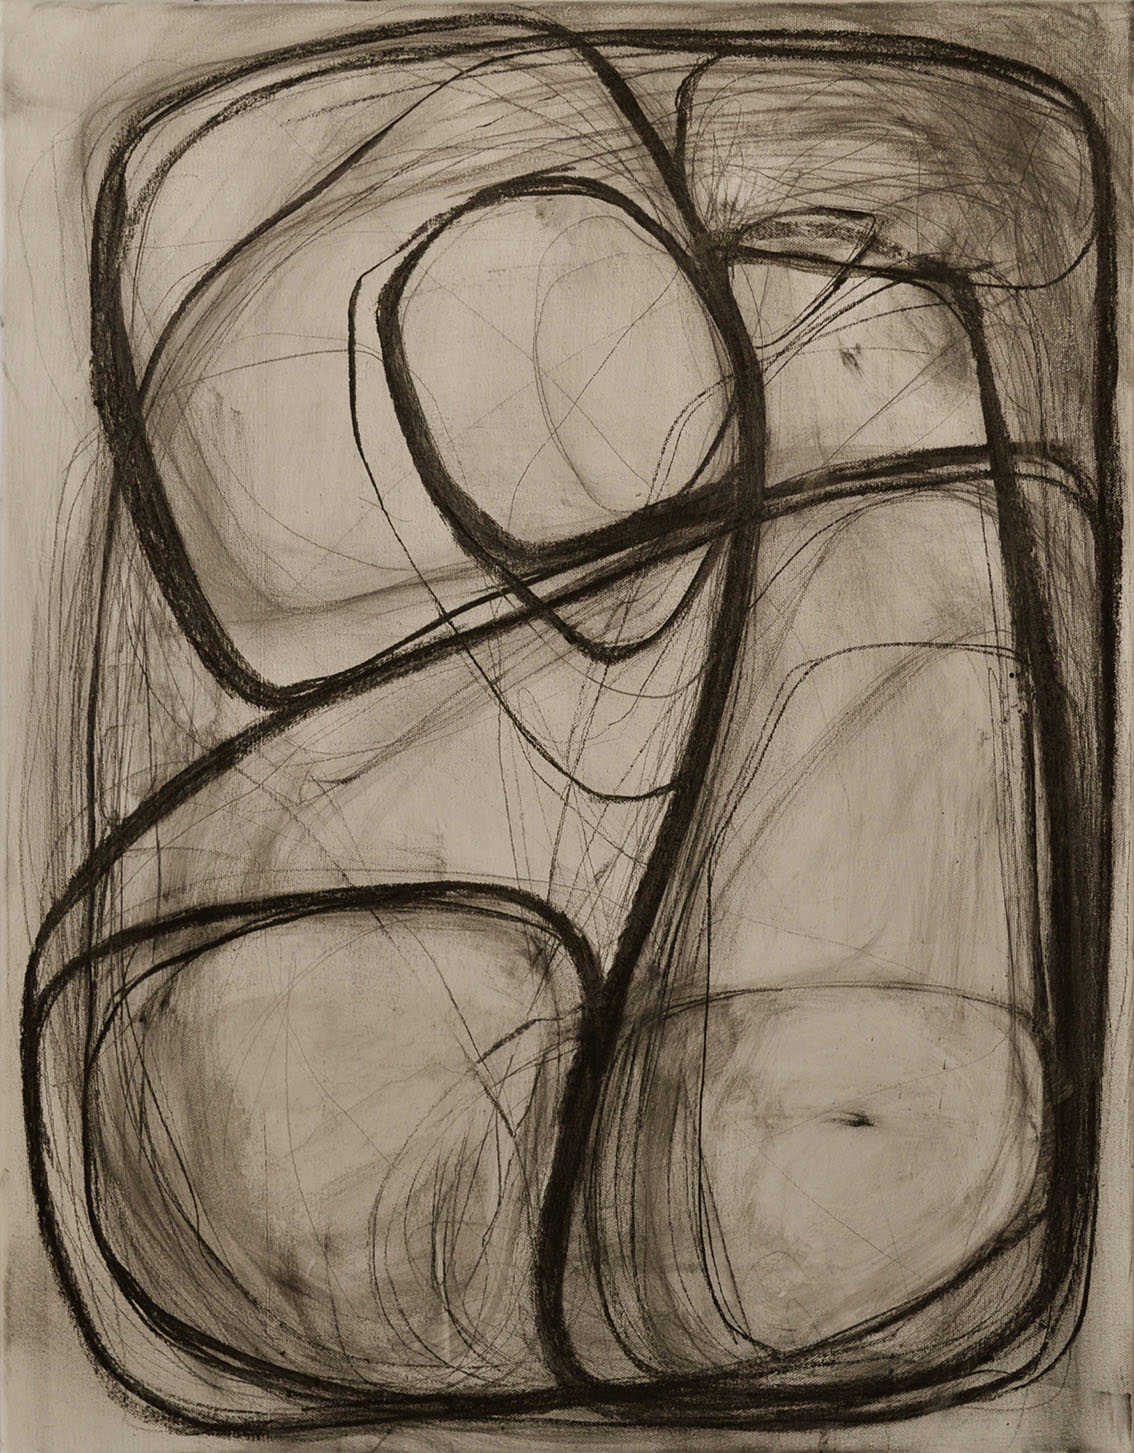 charcoal on canvas 80 x 100 cm